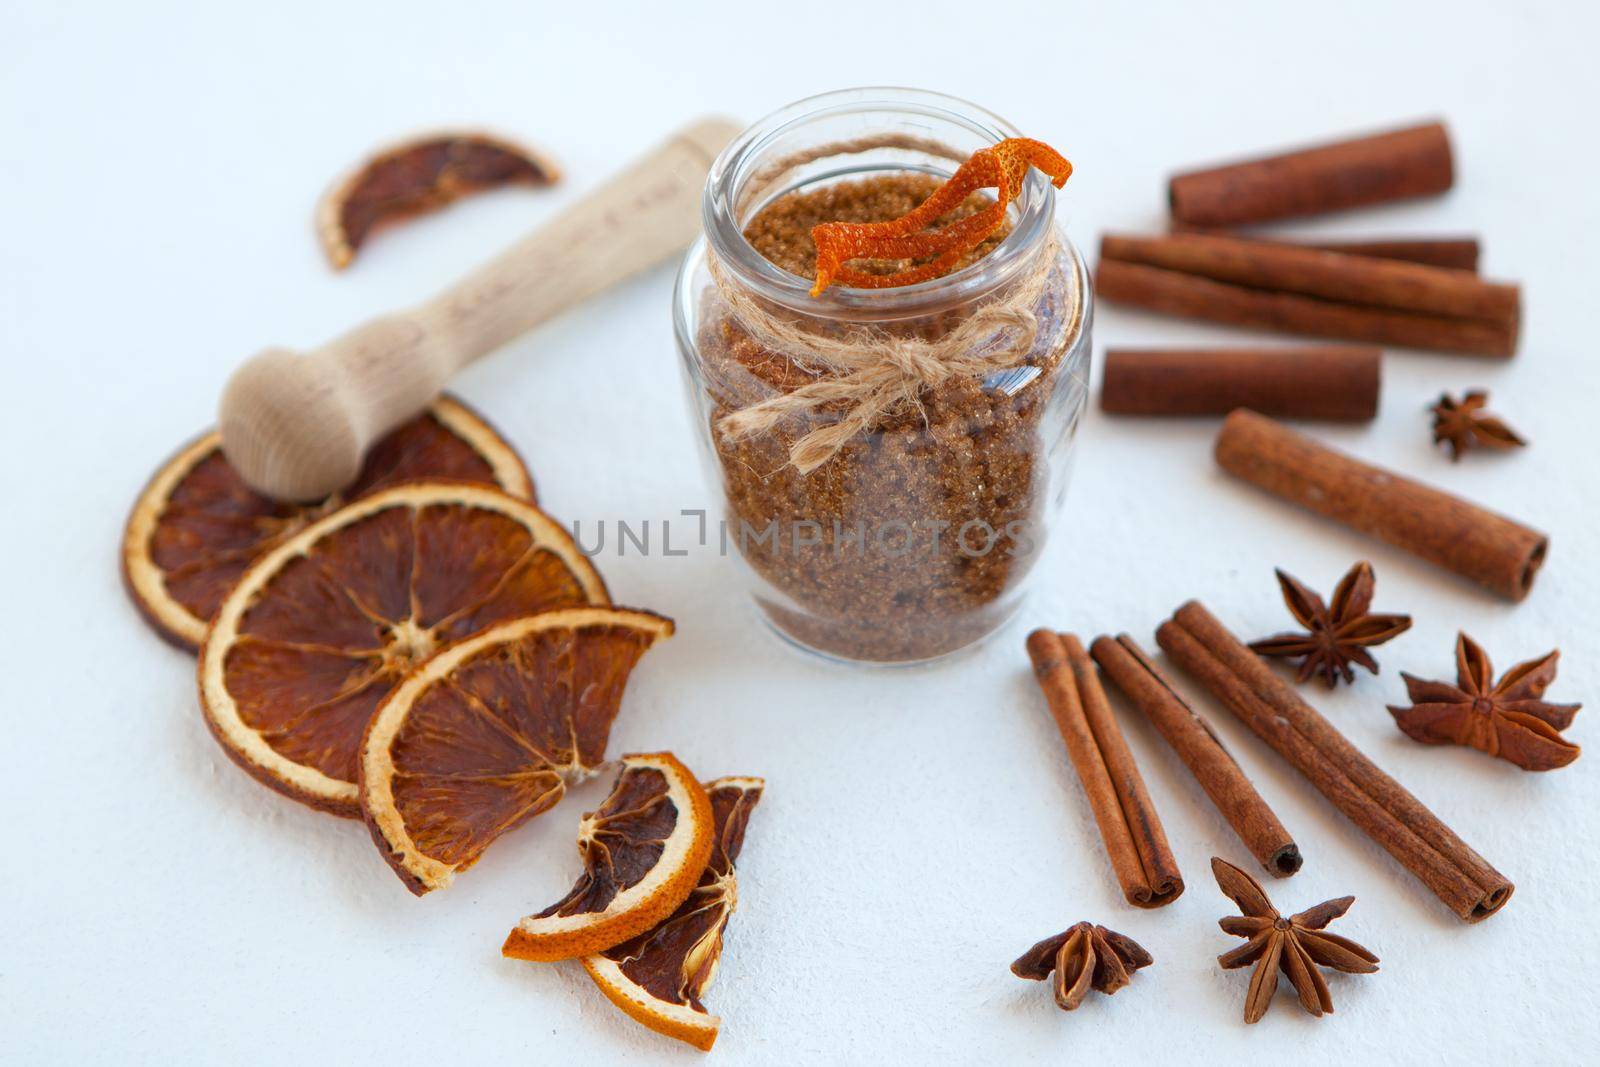 Cinnamon sticks, dried oranges and star anise with brown sugar bottle with shallow depth of field on white background. Baking ingredients for cooking